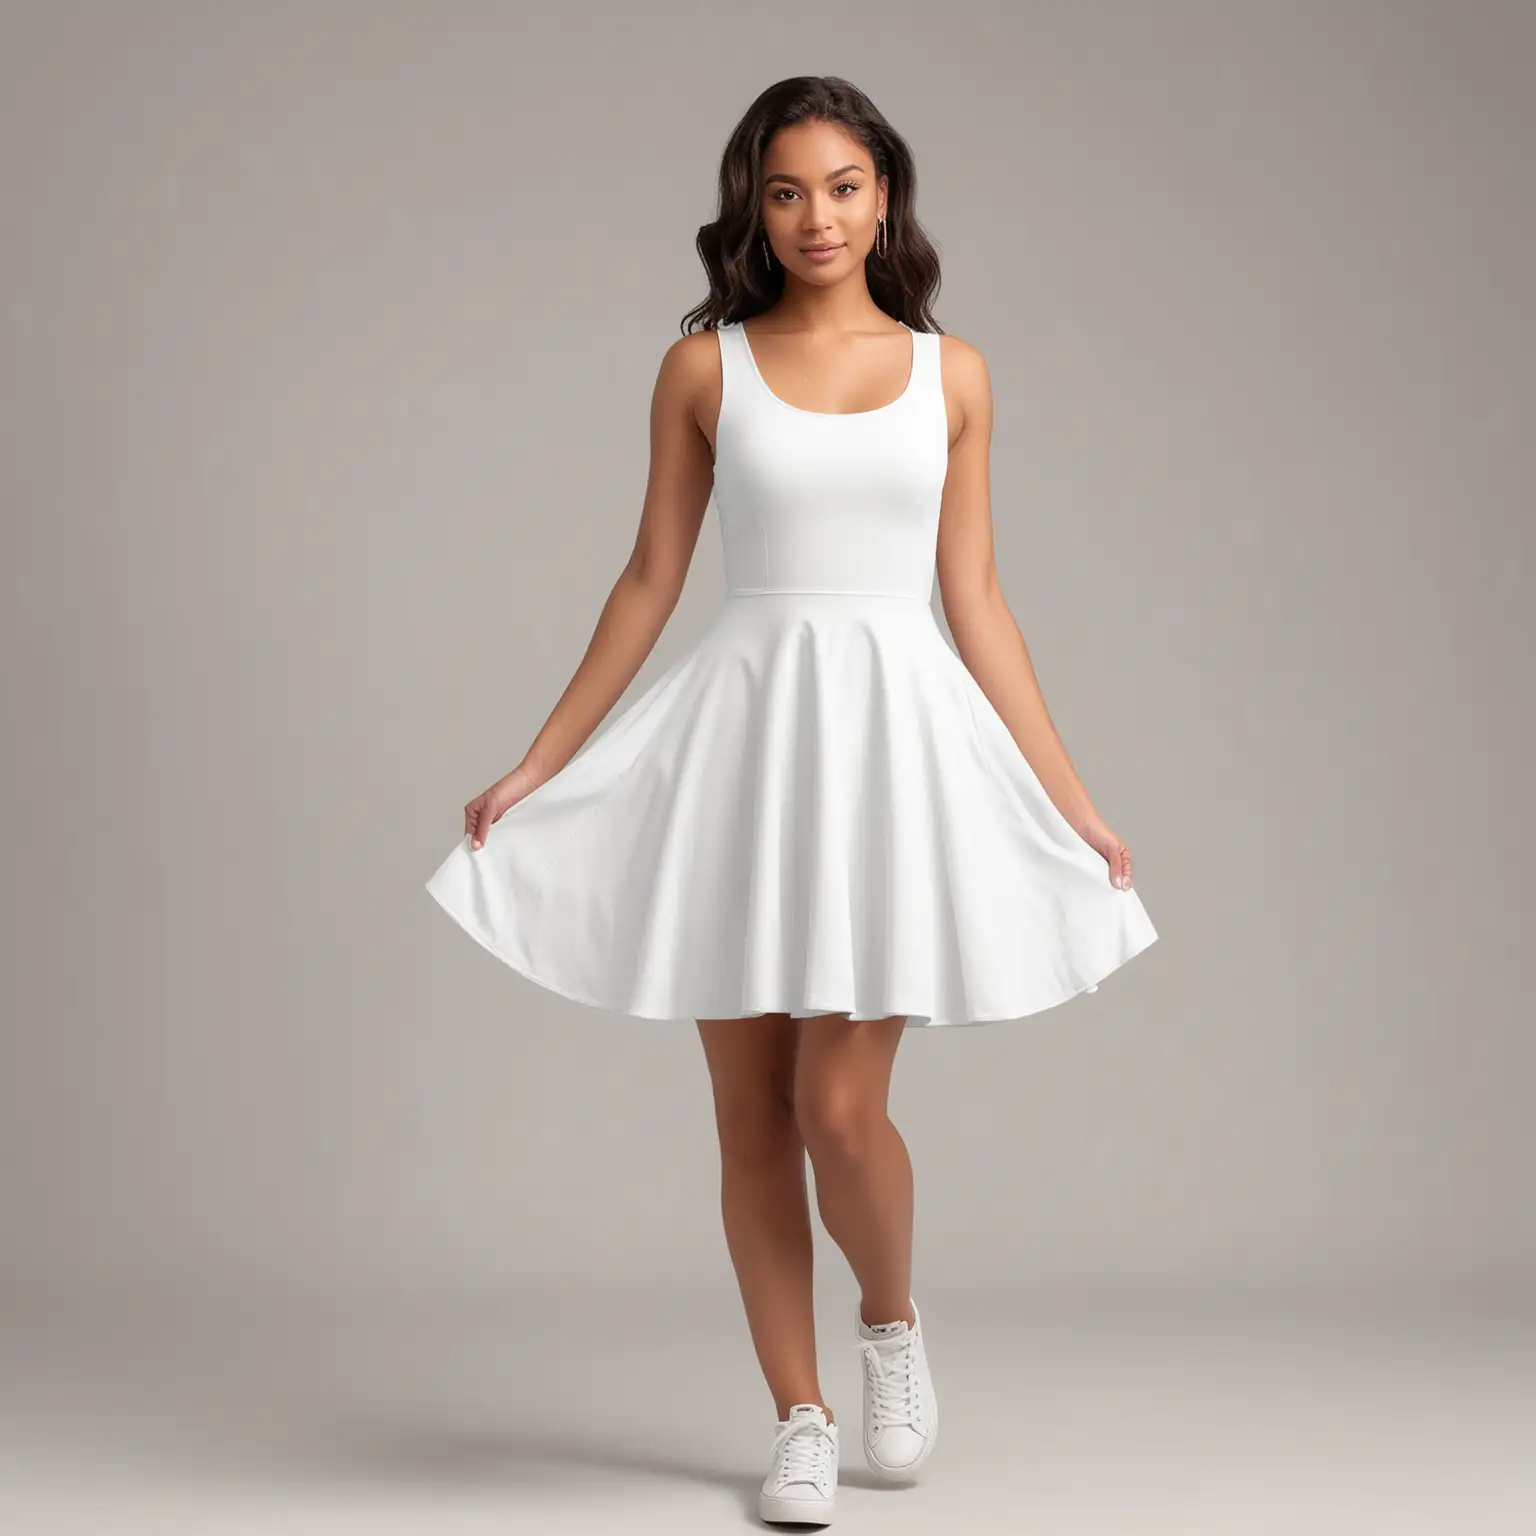 mockup for a skater style dress with tank top sleeves.  the model should be female and resemble carrier white.  the background of the phot should look like a prom.